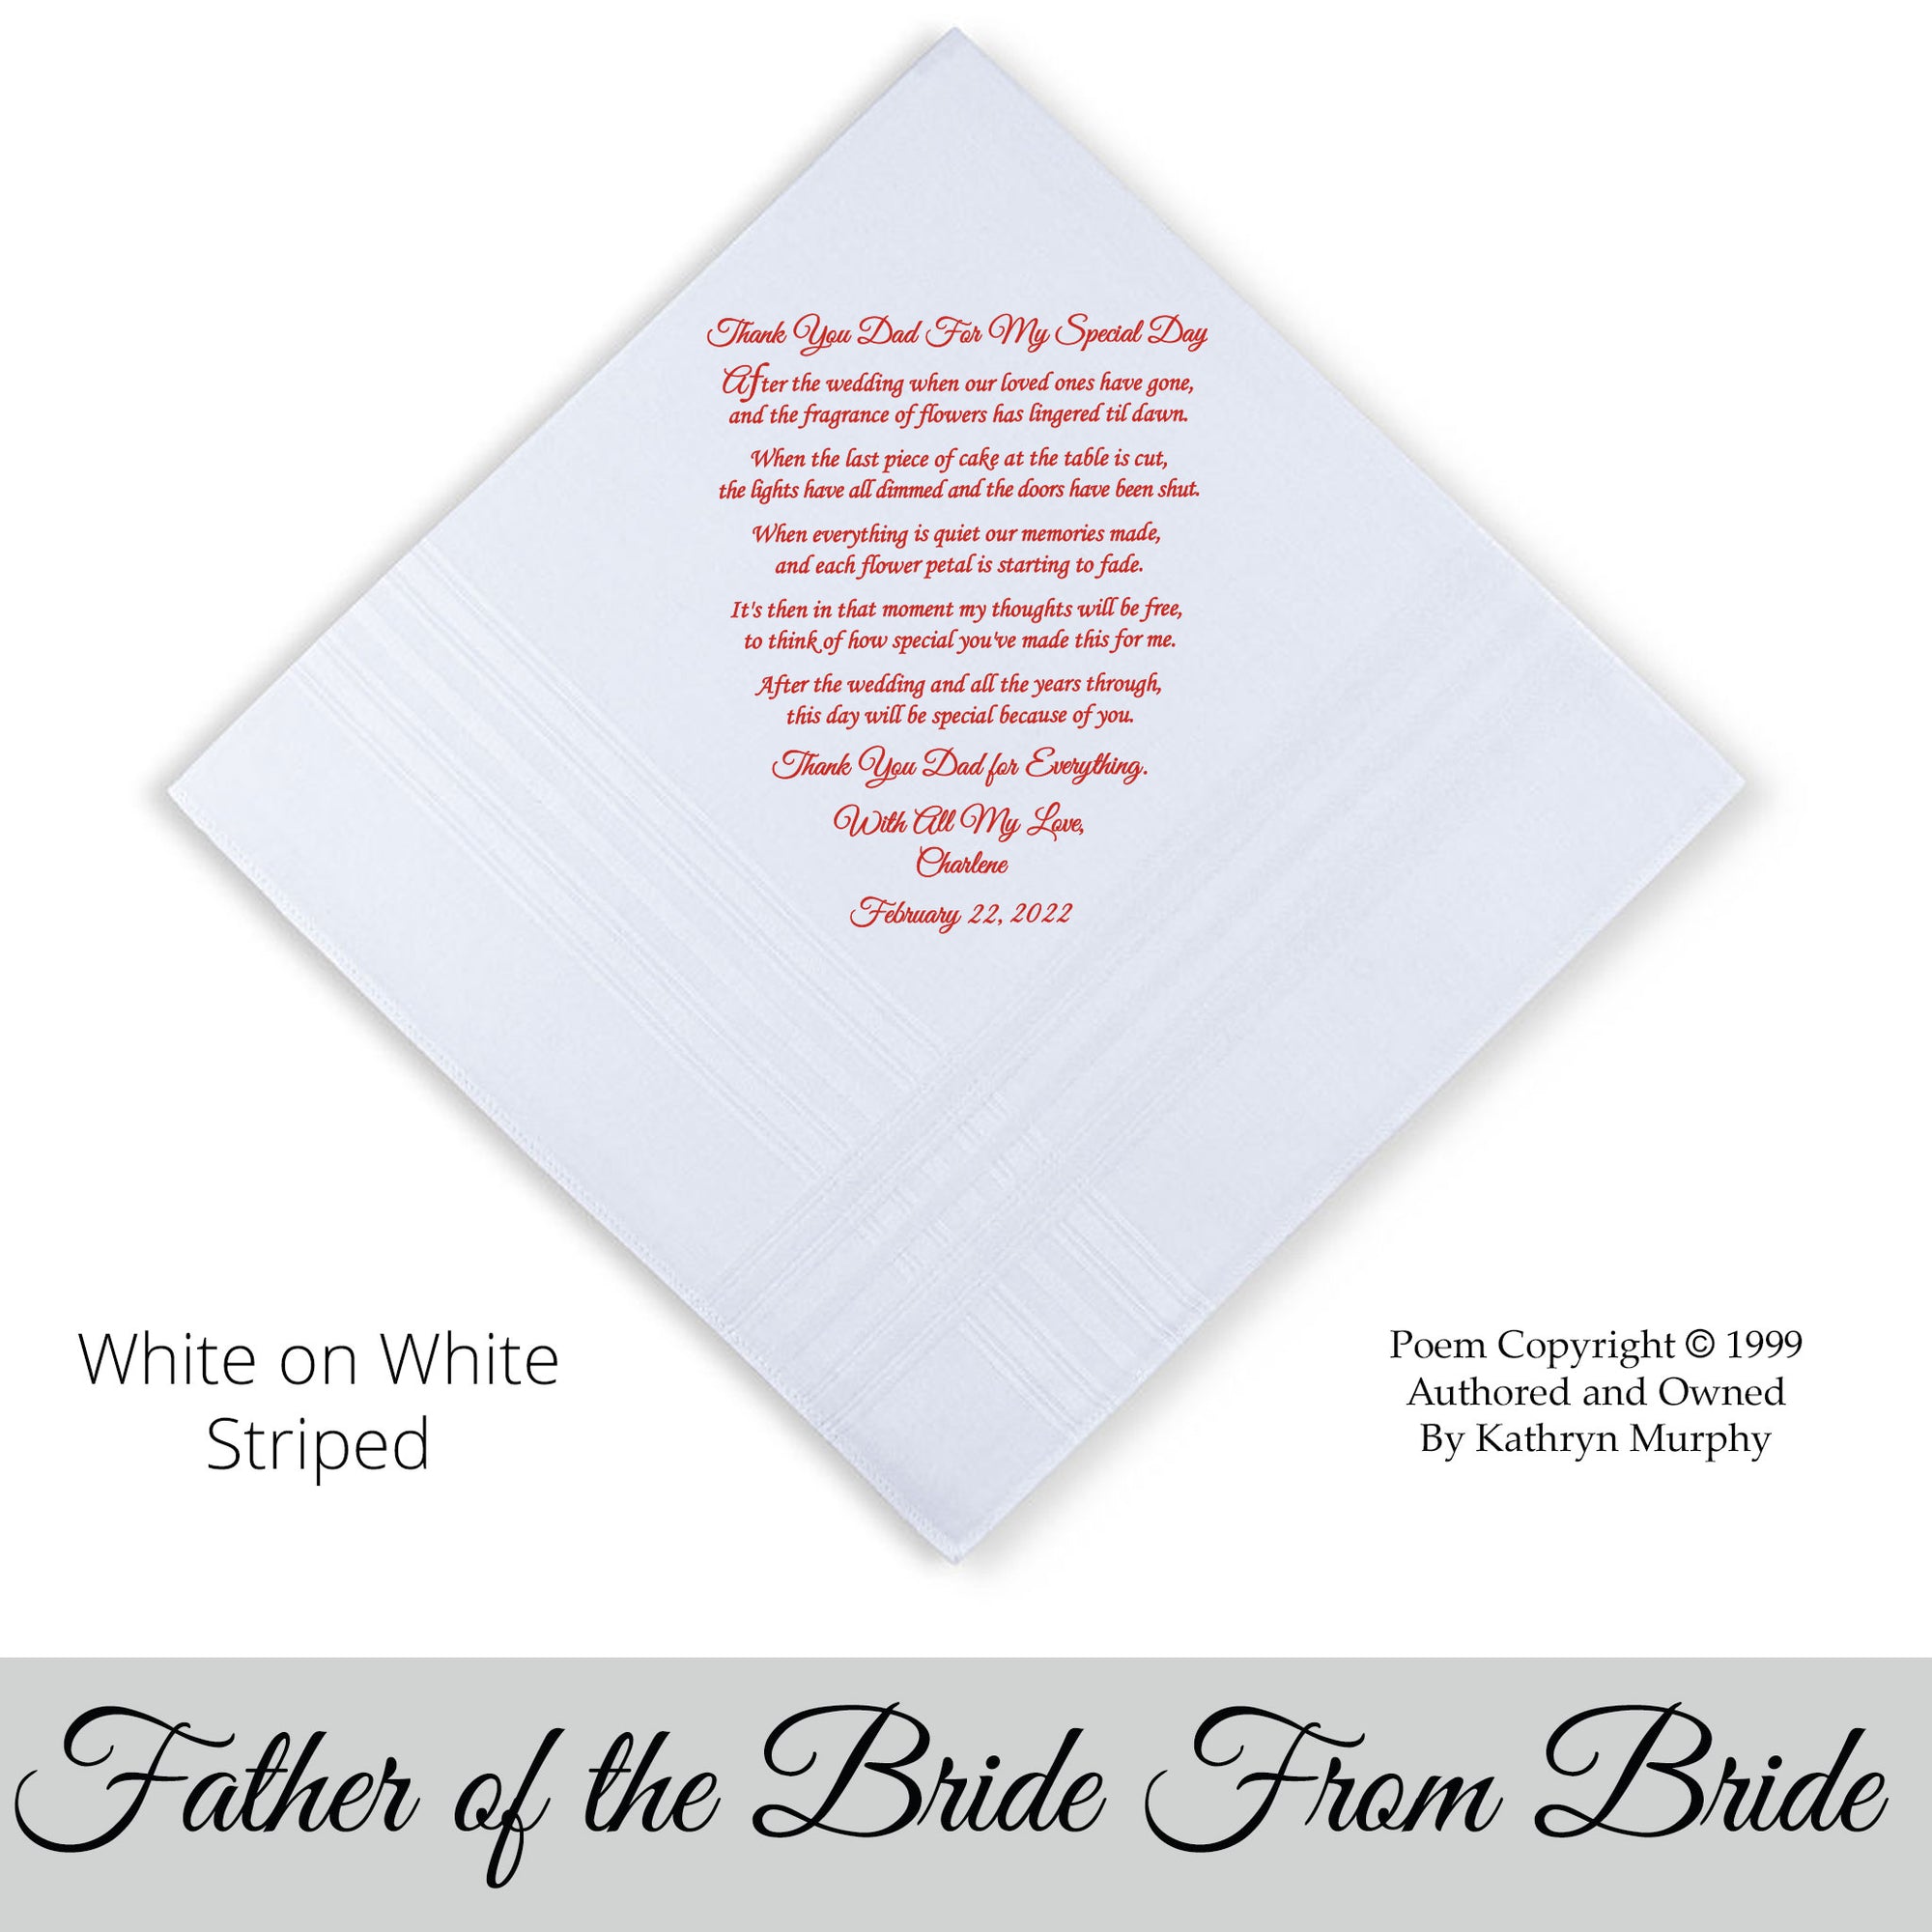 For the father of the bride wedding hankie with poem "Thank you for my special day"